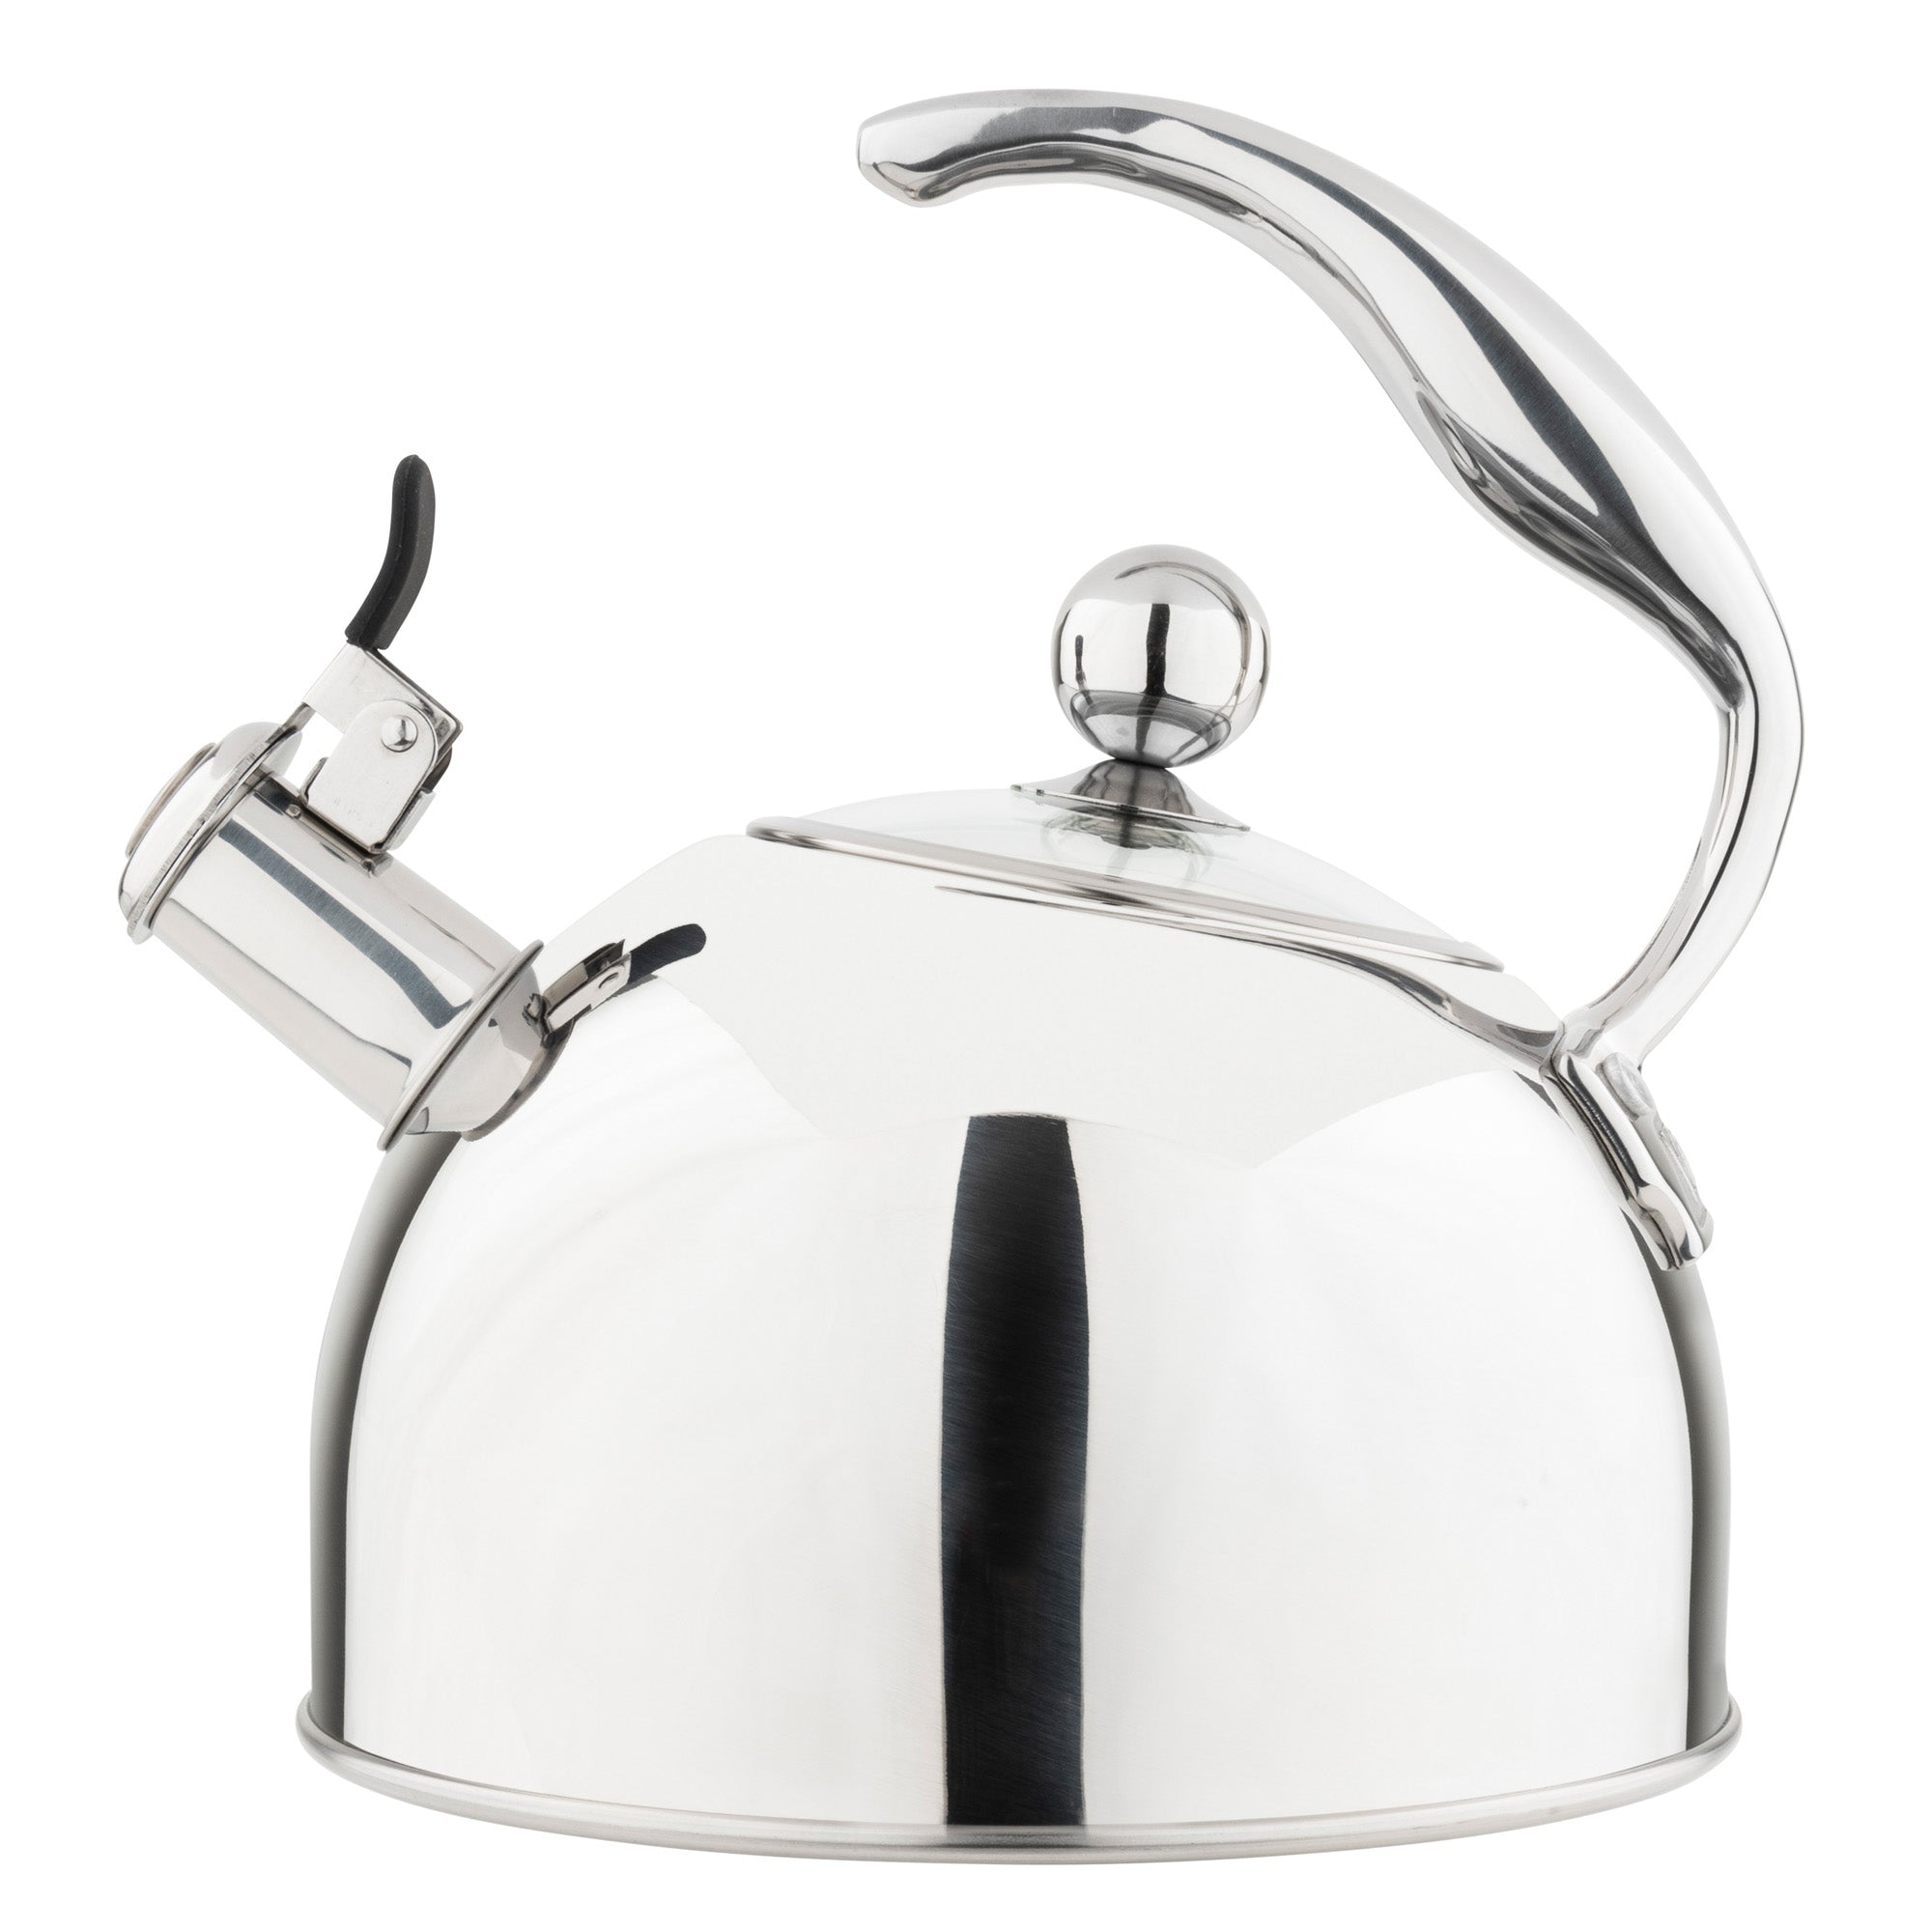 Whistling Tea Kettle Stainless Steel Teapot, Teakettle for Stovetop  Induction Stove Top, Fast Boiling Heat Water Tea Pot 2.6 Quart